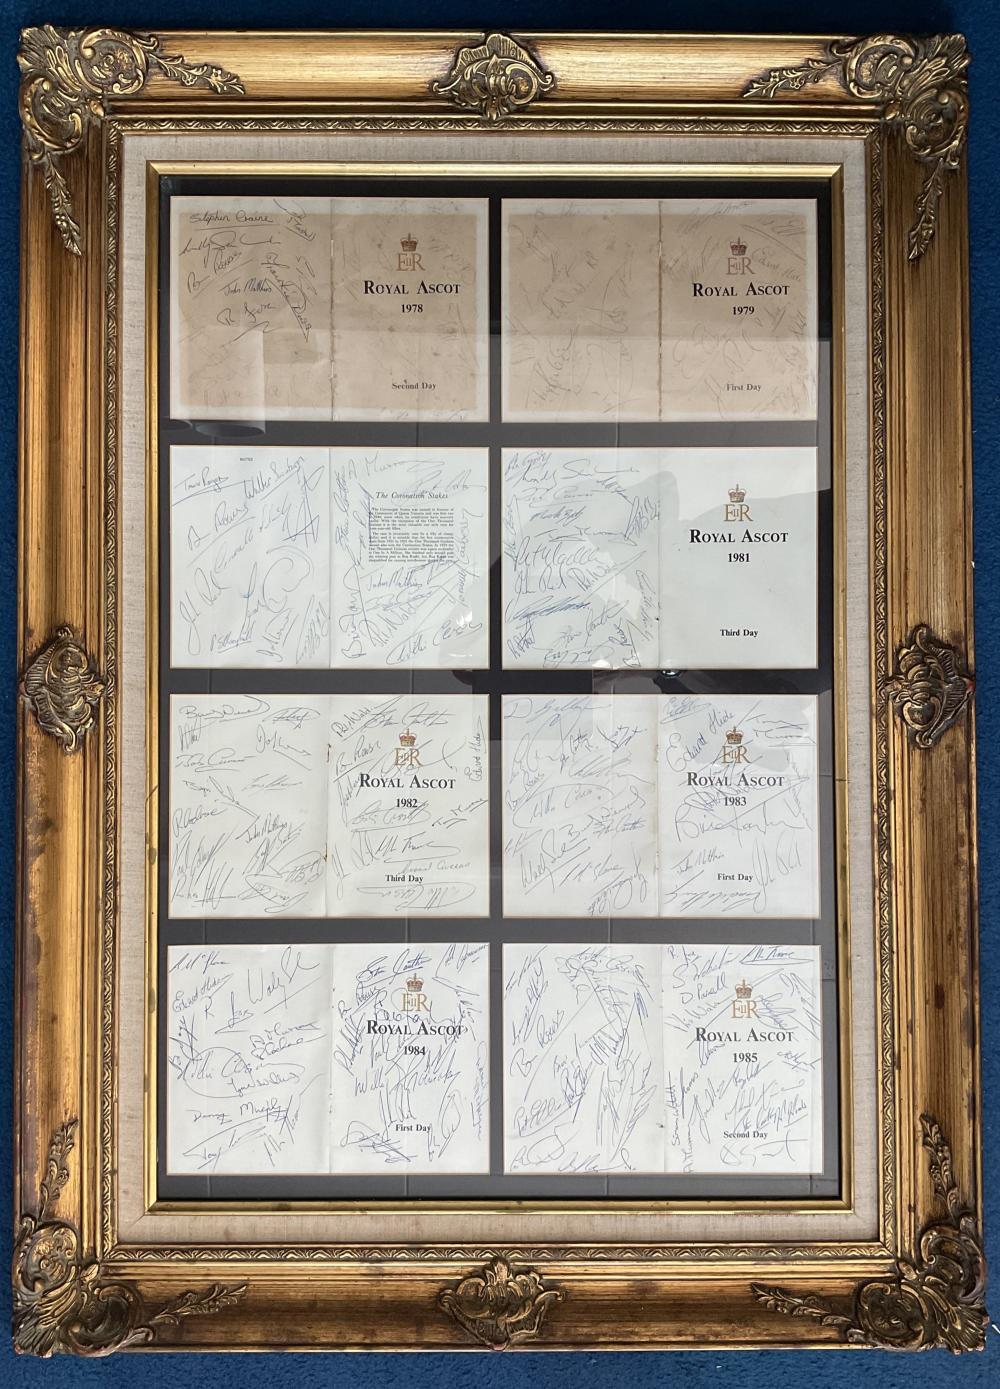 Horse Racing Royal Ascot multi signed Framed and Mounted signature piece includes race cards from